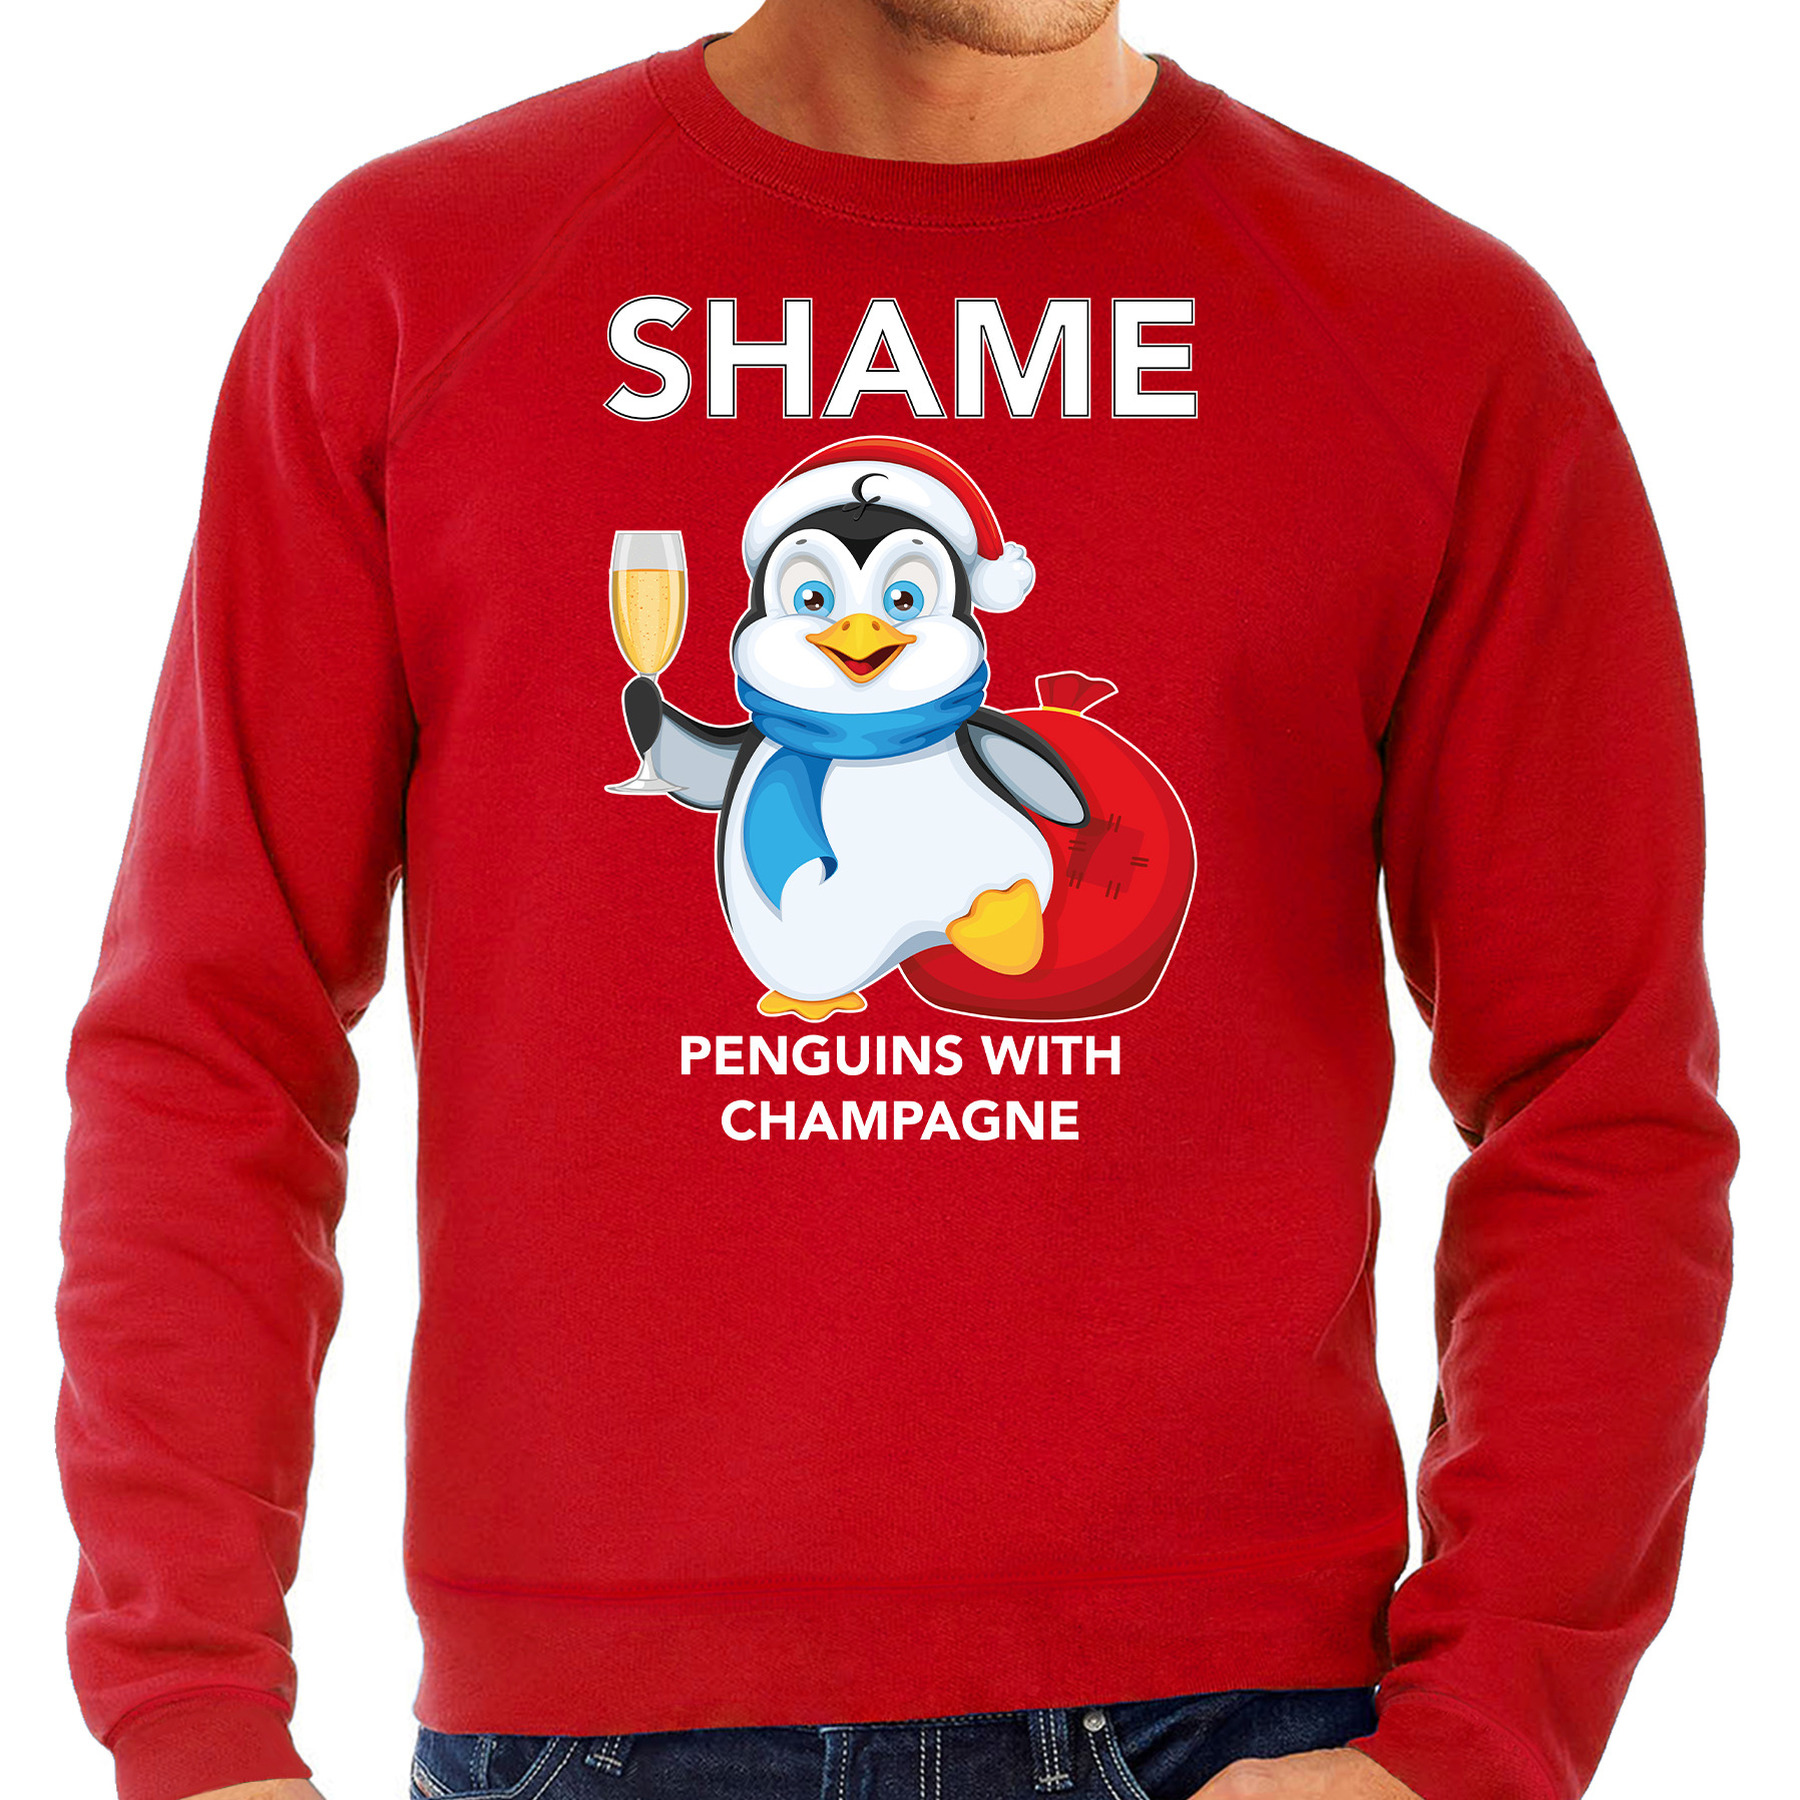 Pinguin Kersttrui-outfit Shame penguins with champagne rood voor heren